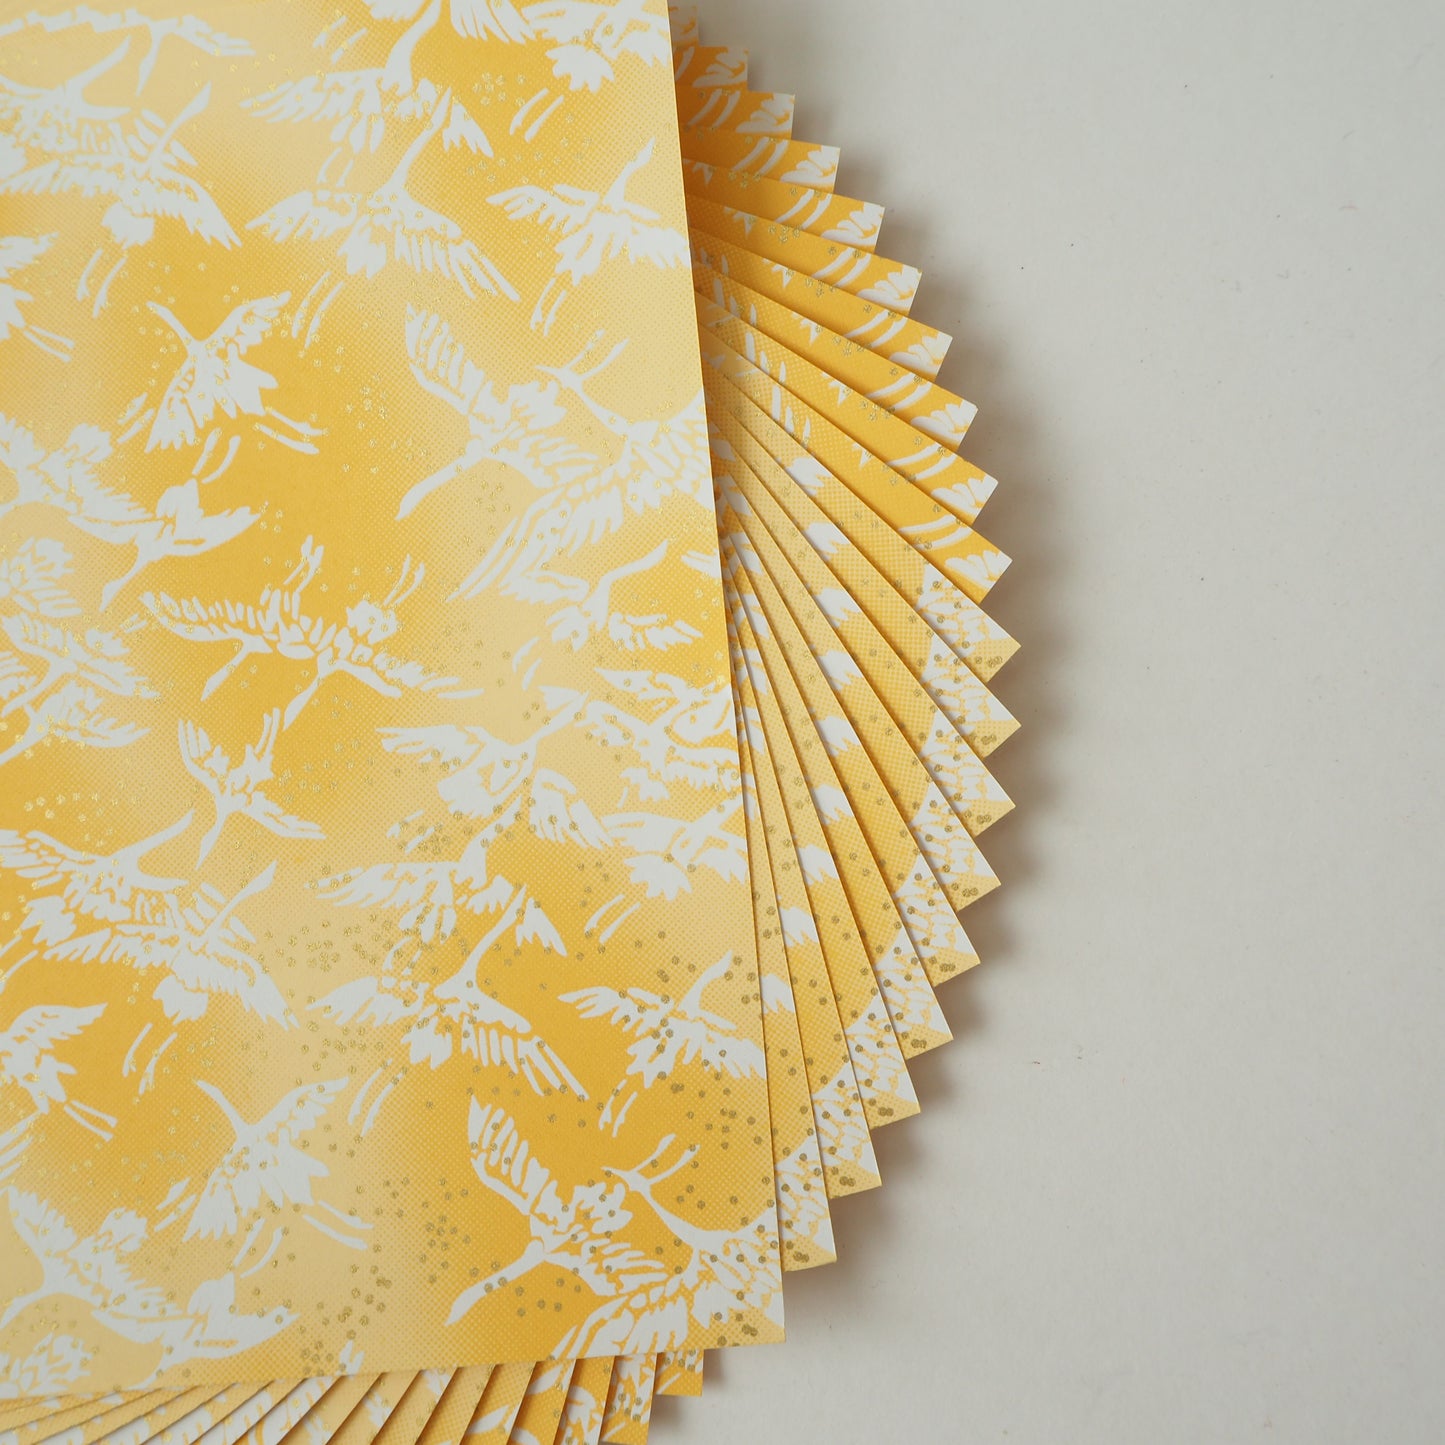 Pack of 20 Sheets 14x14cm Yuzen Washi Origami Paper HZ-091 - Cranes Sunny Yellow